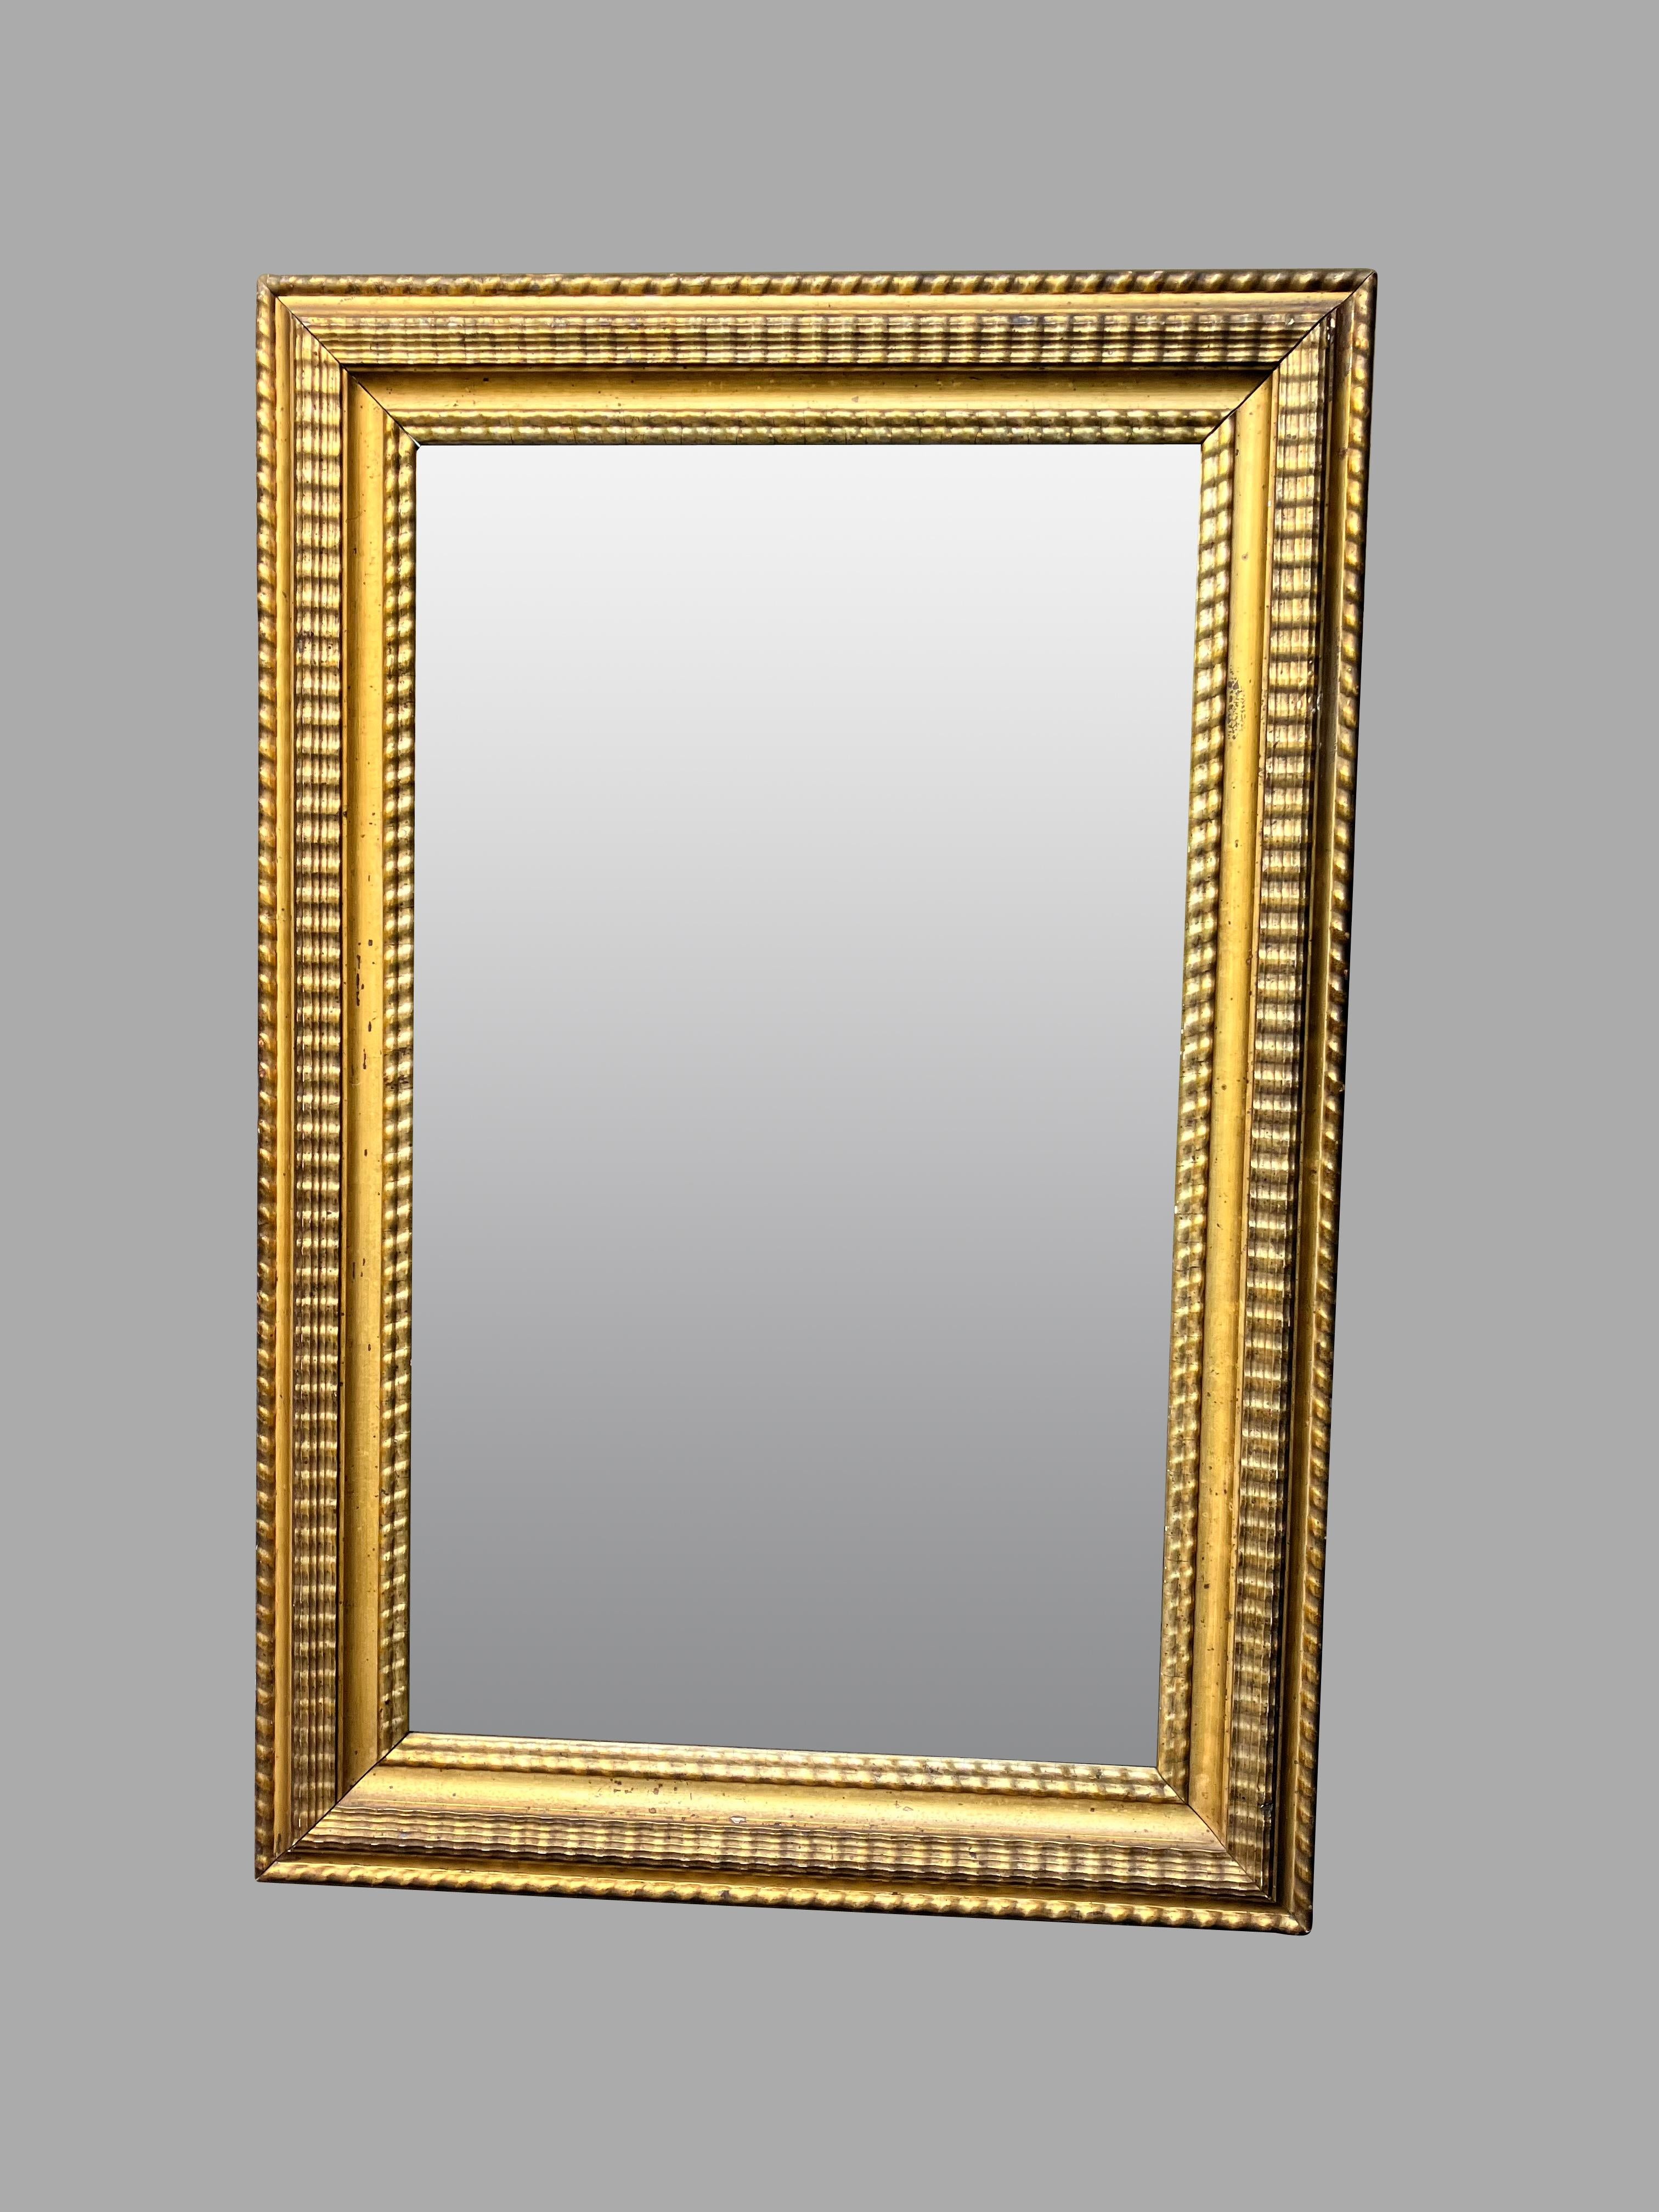 An attractive American giltwood and gilt composition mirror retaining its original glass plate, the frame with a gadrooned and rope form border. This mirror is a useful compact size suitable for a hallway or library. The original glass has an